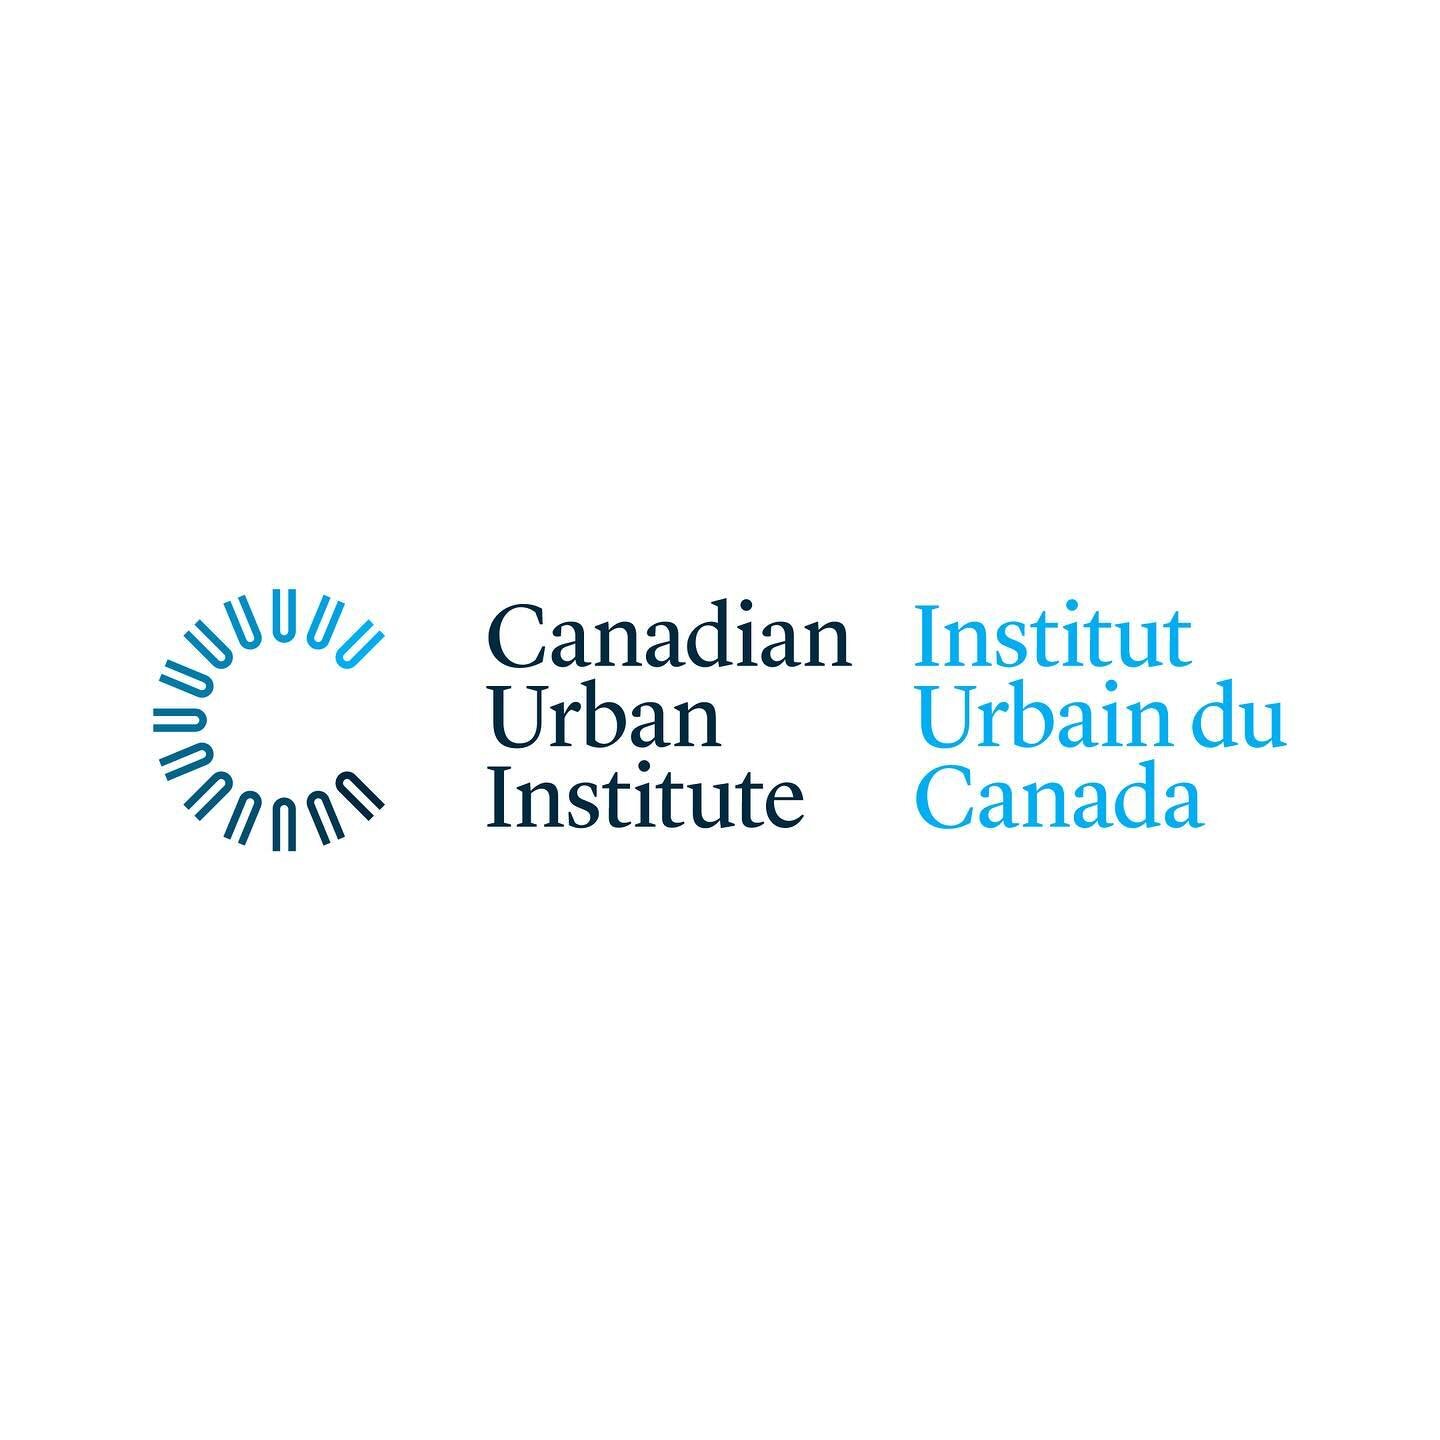 Logo and brand standards for the Canadian Urban Institute &ndash; a national organization that addresses key issues such as living, employment and the environment through an urban lens.

The 13 U&rsquo;s in the logo represent Canada&rsquo;s 13 provin